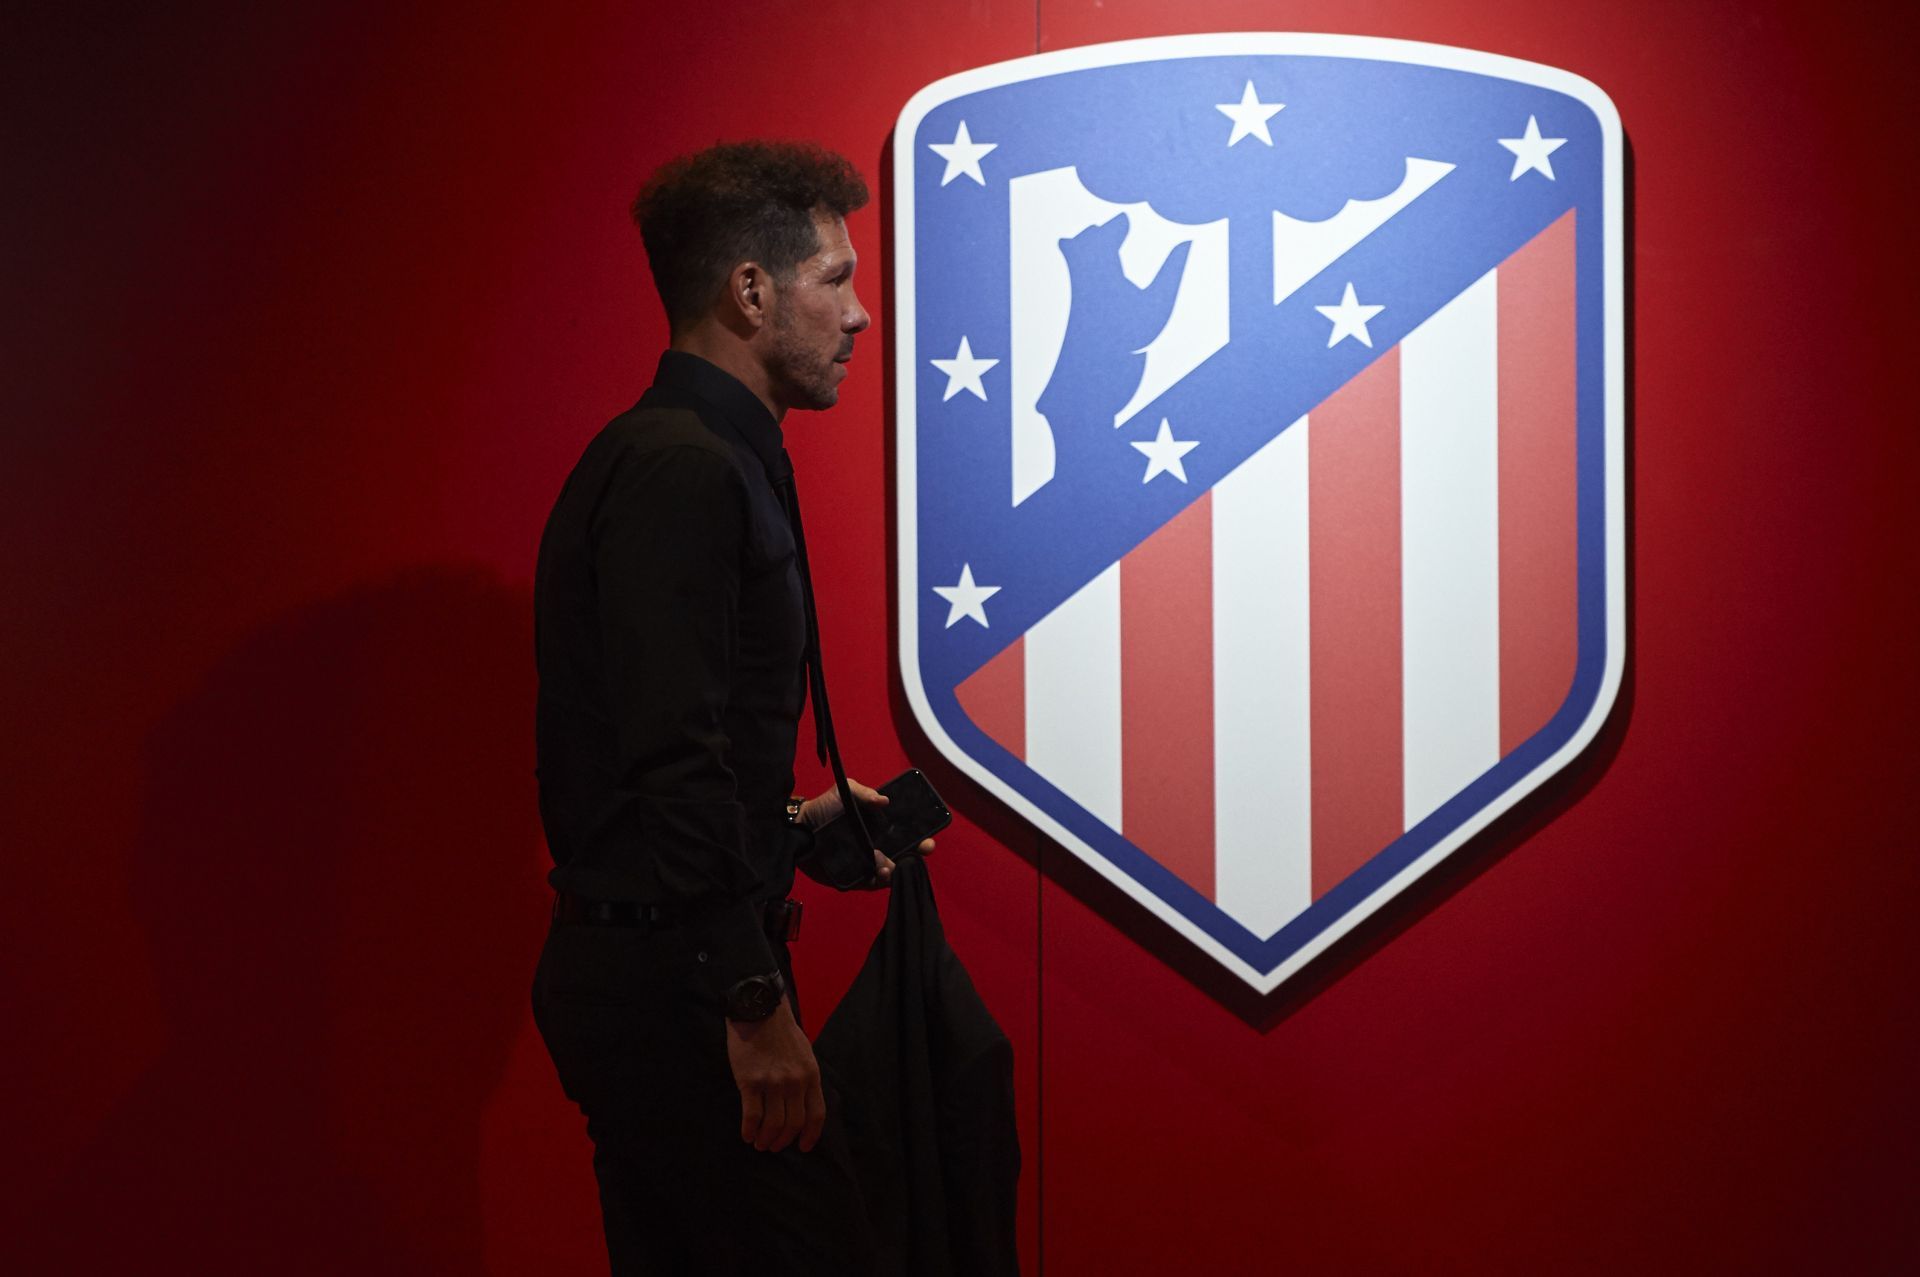 Diego Simeone has been in charge of Atletico Madrid since 2011.